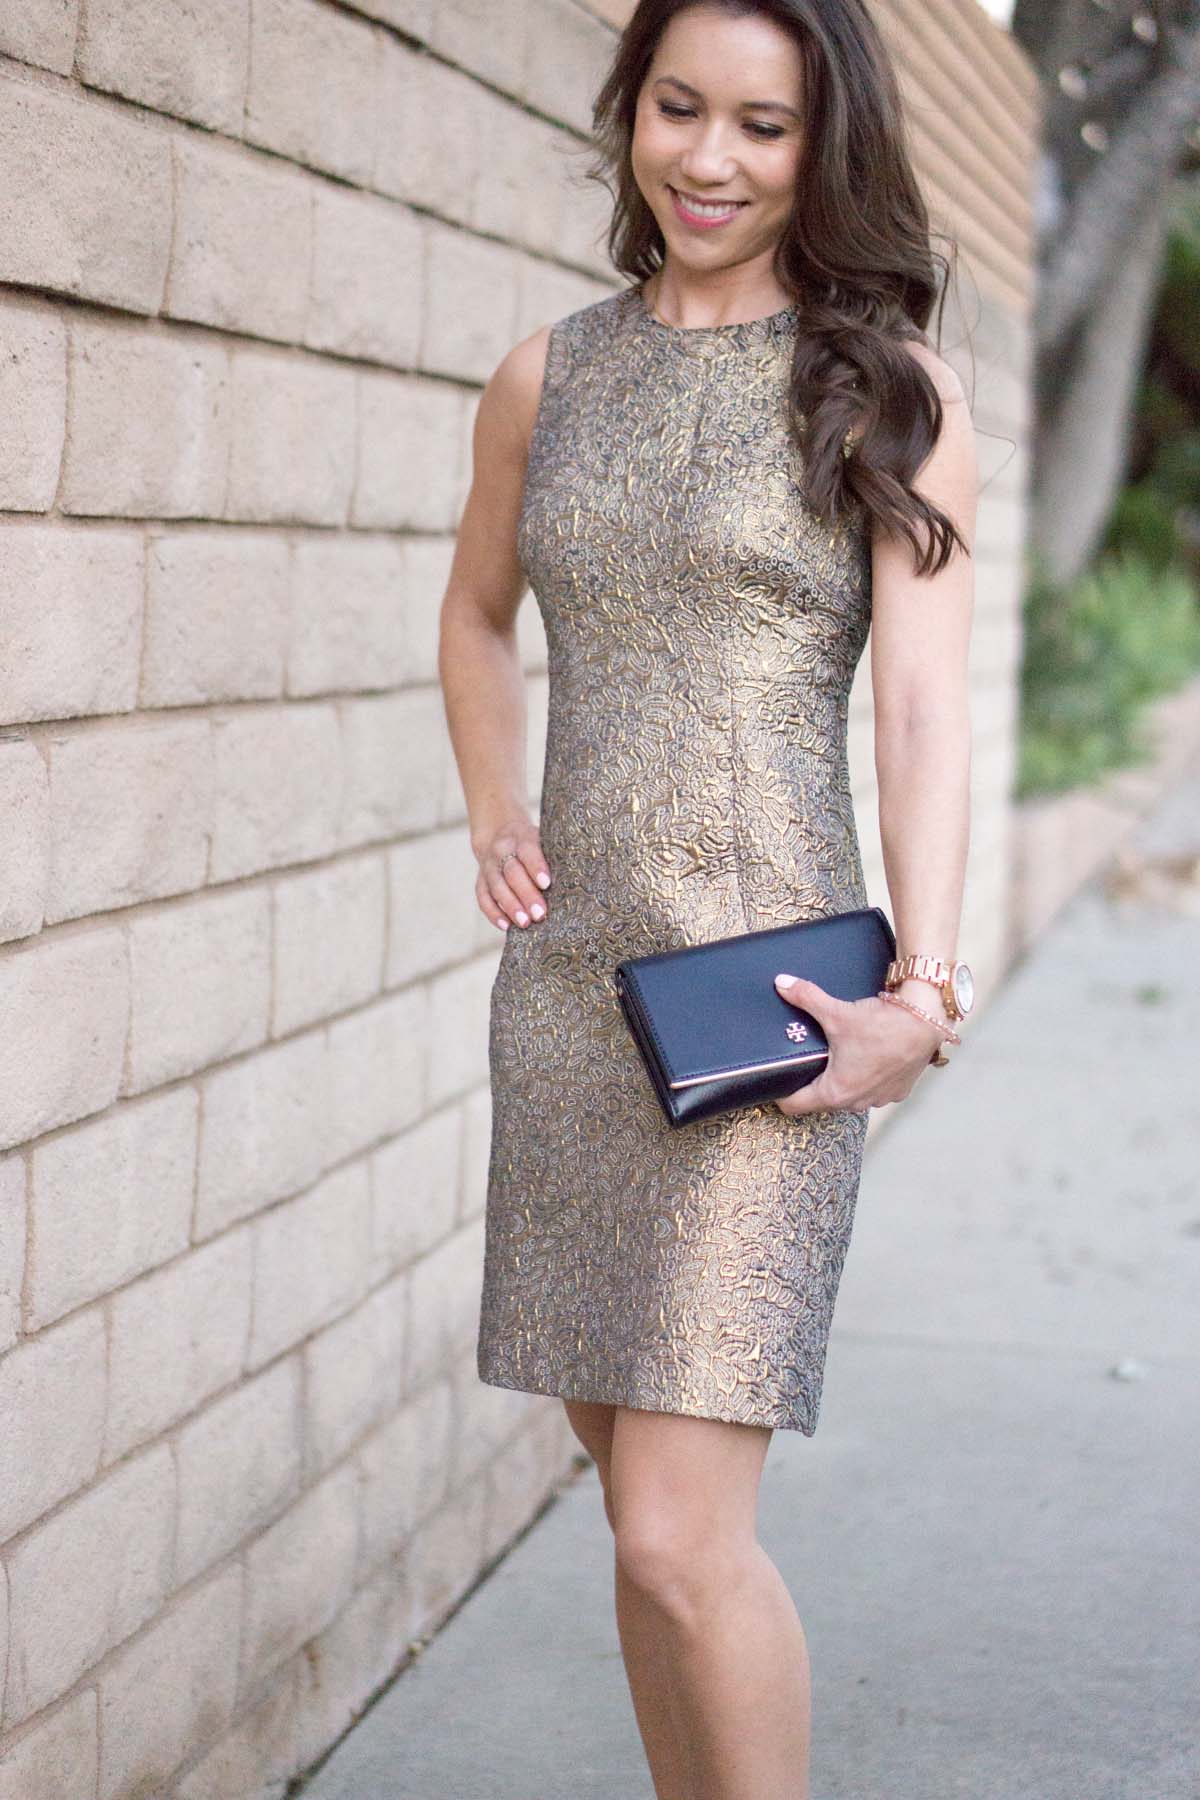 Gold Holiday Party Dress | Easily transition from Christmas, New Year's Eve, Cocktail, Wedding Guest Attire | Ann Taylor, Nordstrom, Bloomingdale's dresses